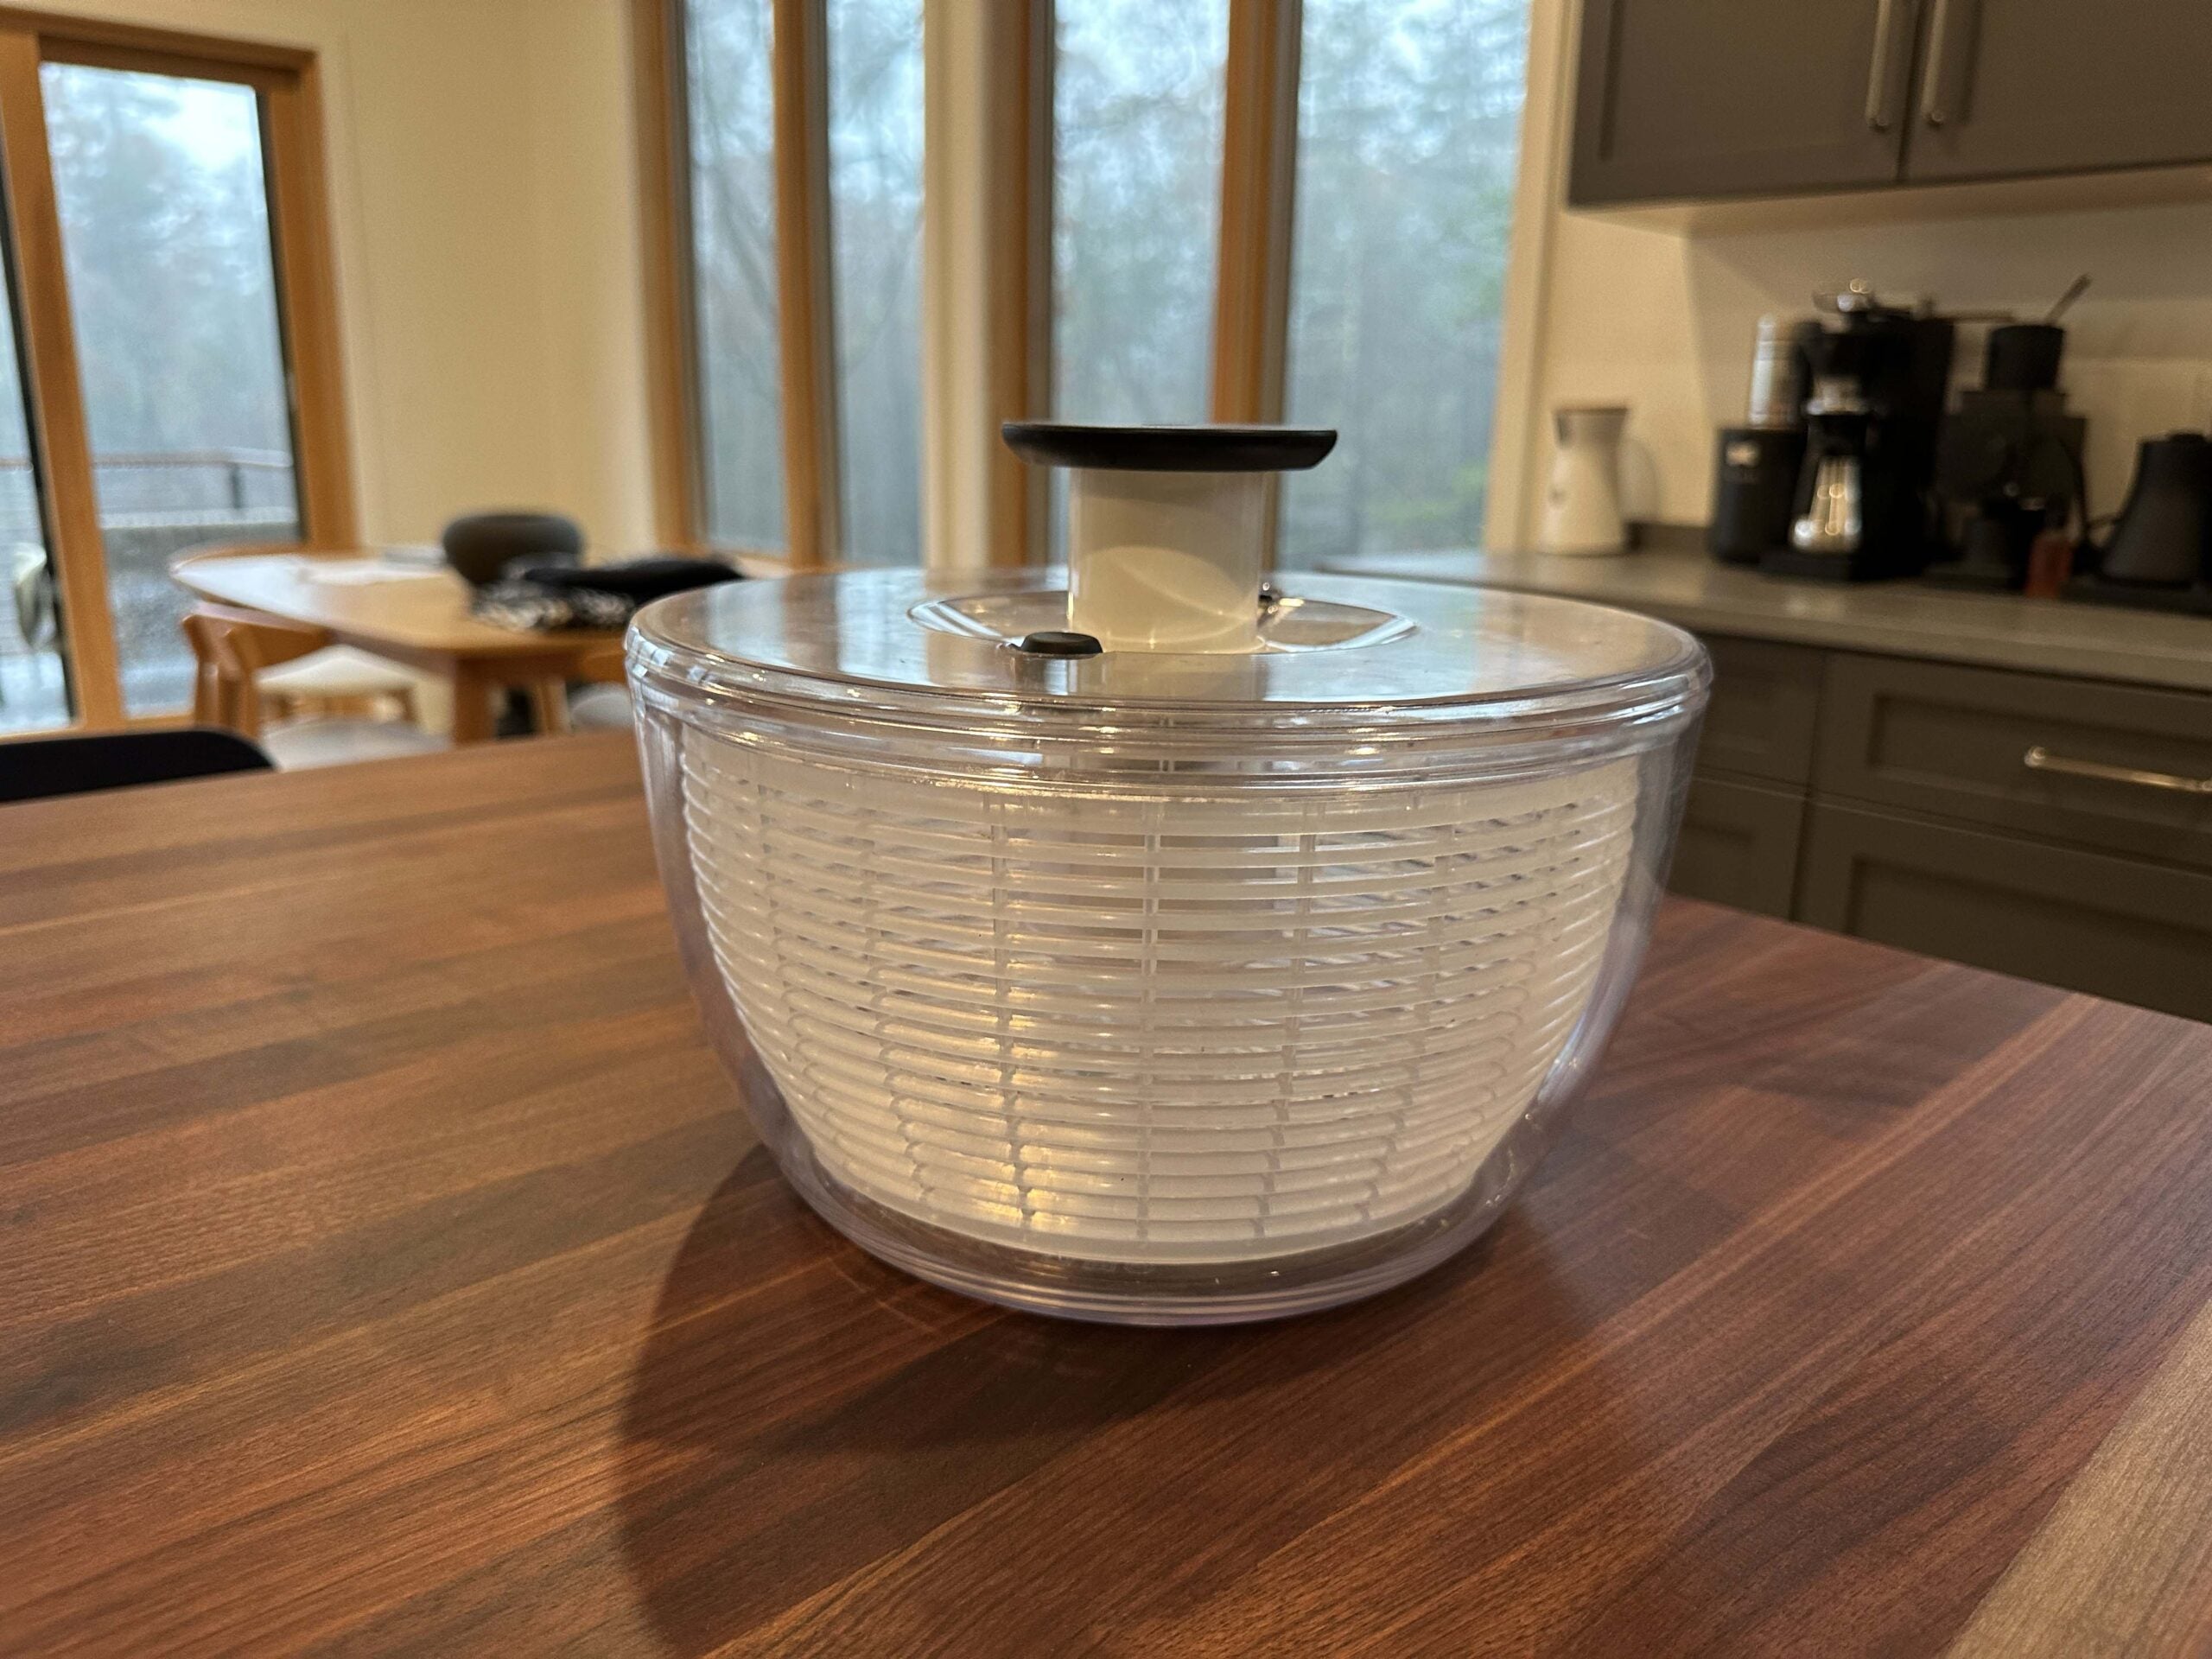 OXO Good Grips Salad Spinner sitting on a wood countertop